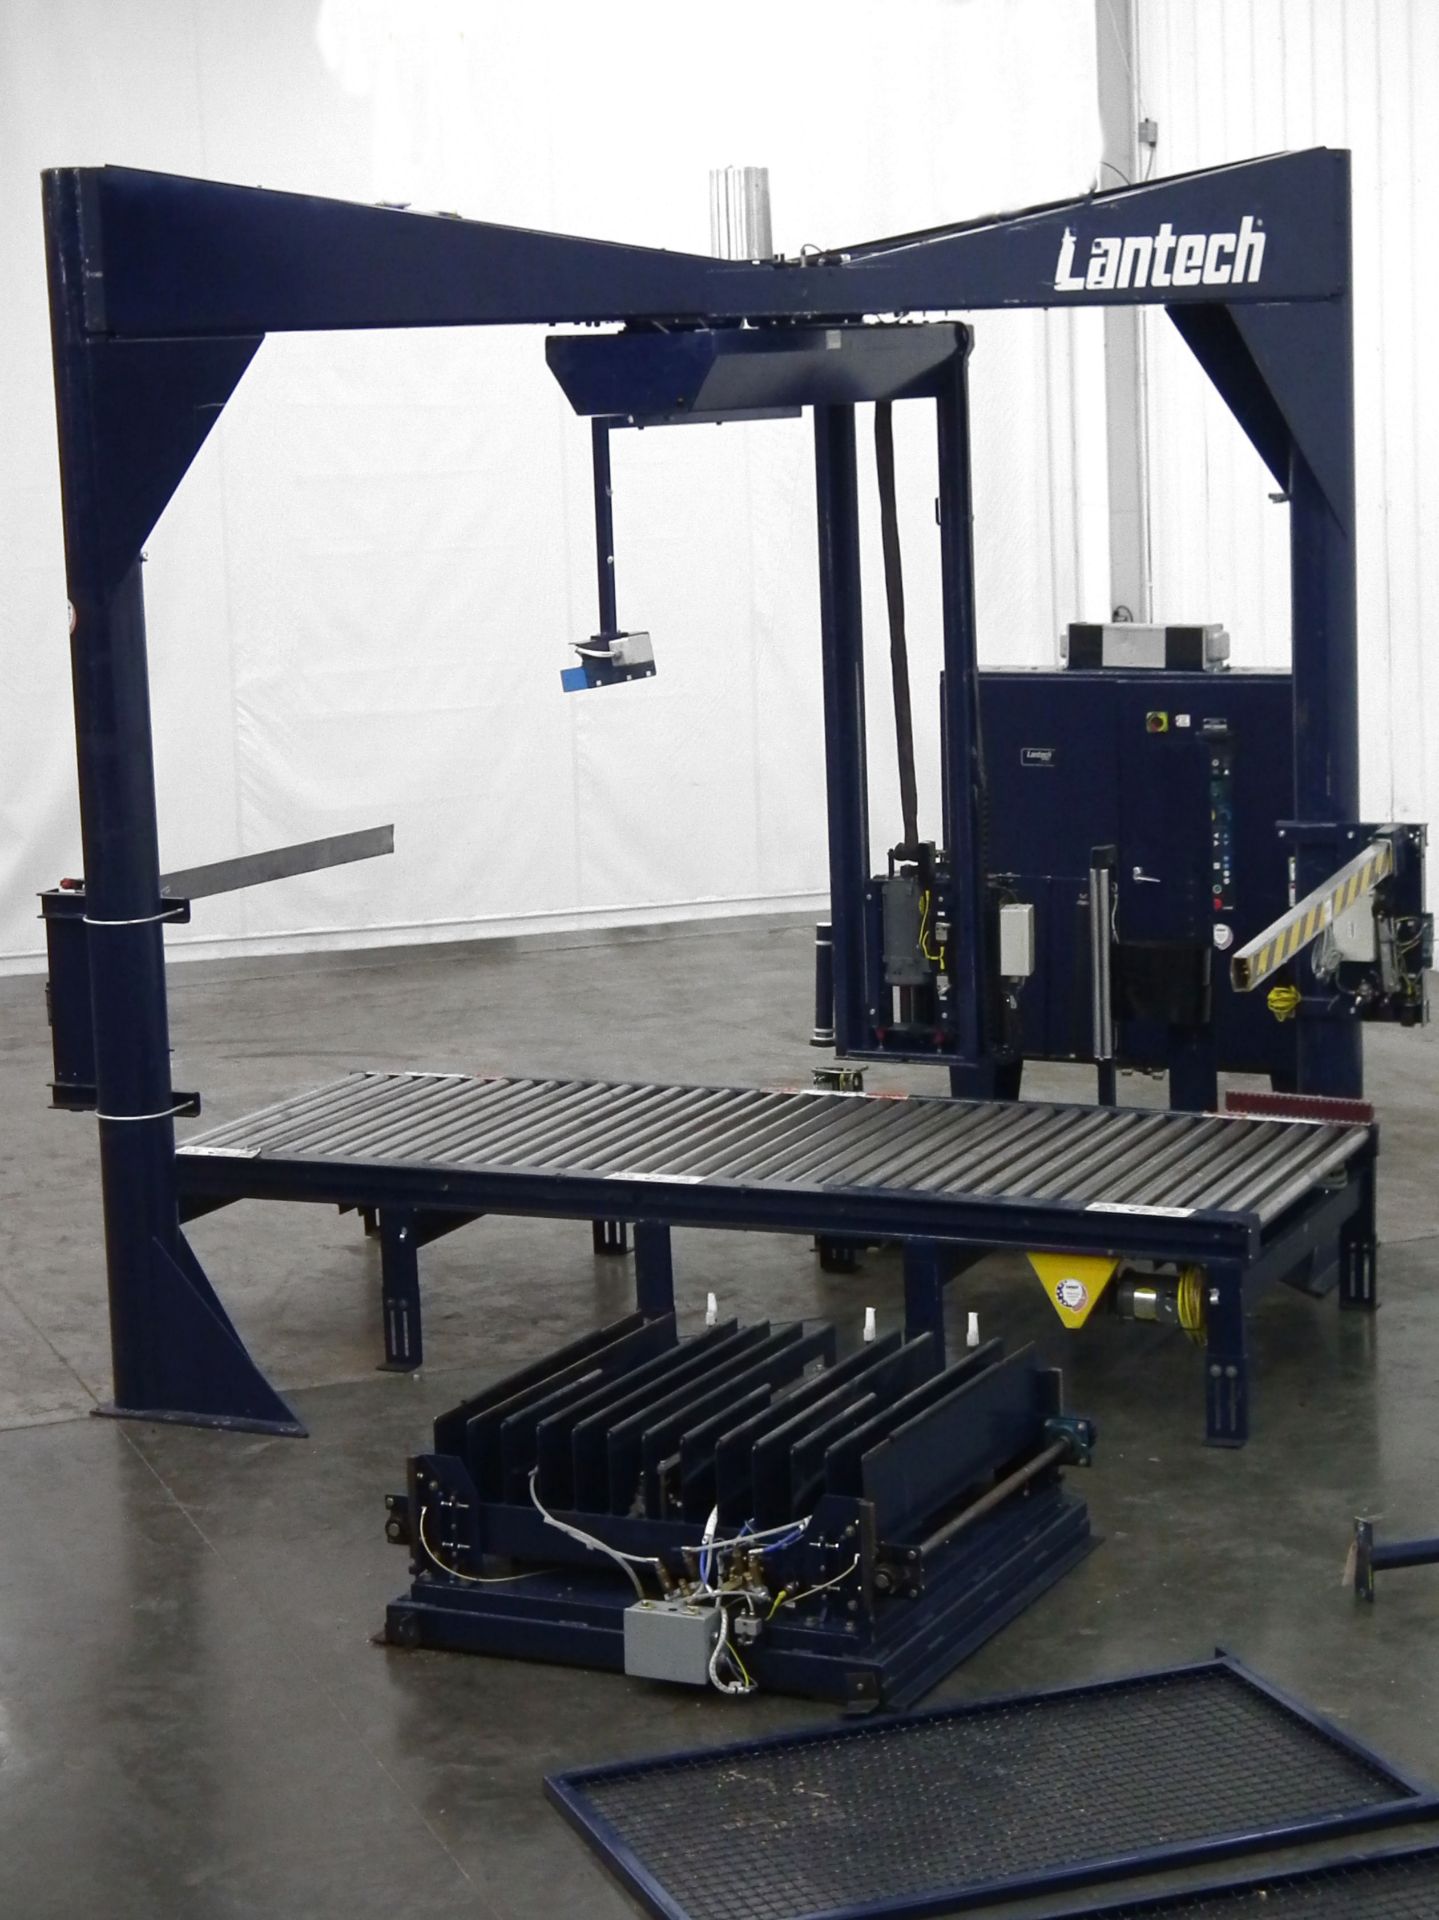 Lantech S3500 Automatic Straddle Stretch Wrapper B3443 - Image 3 of 12